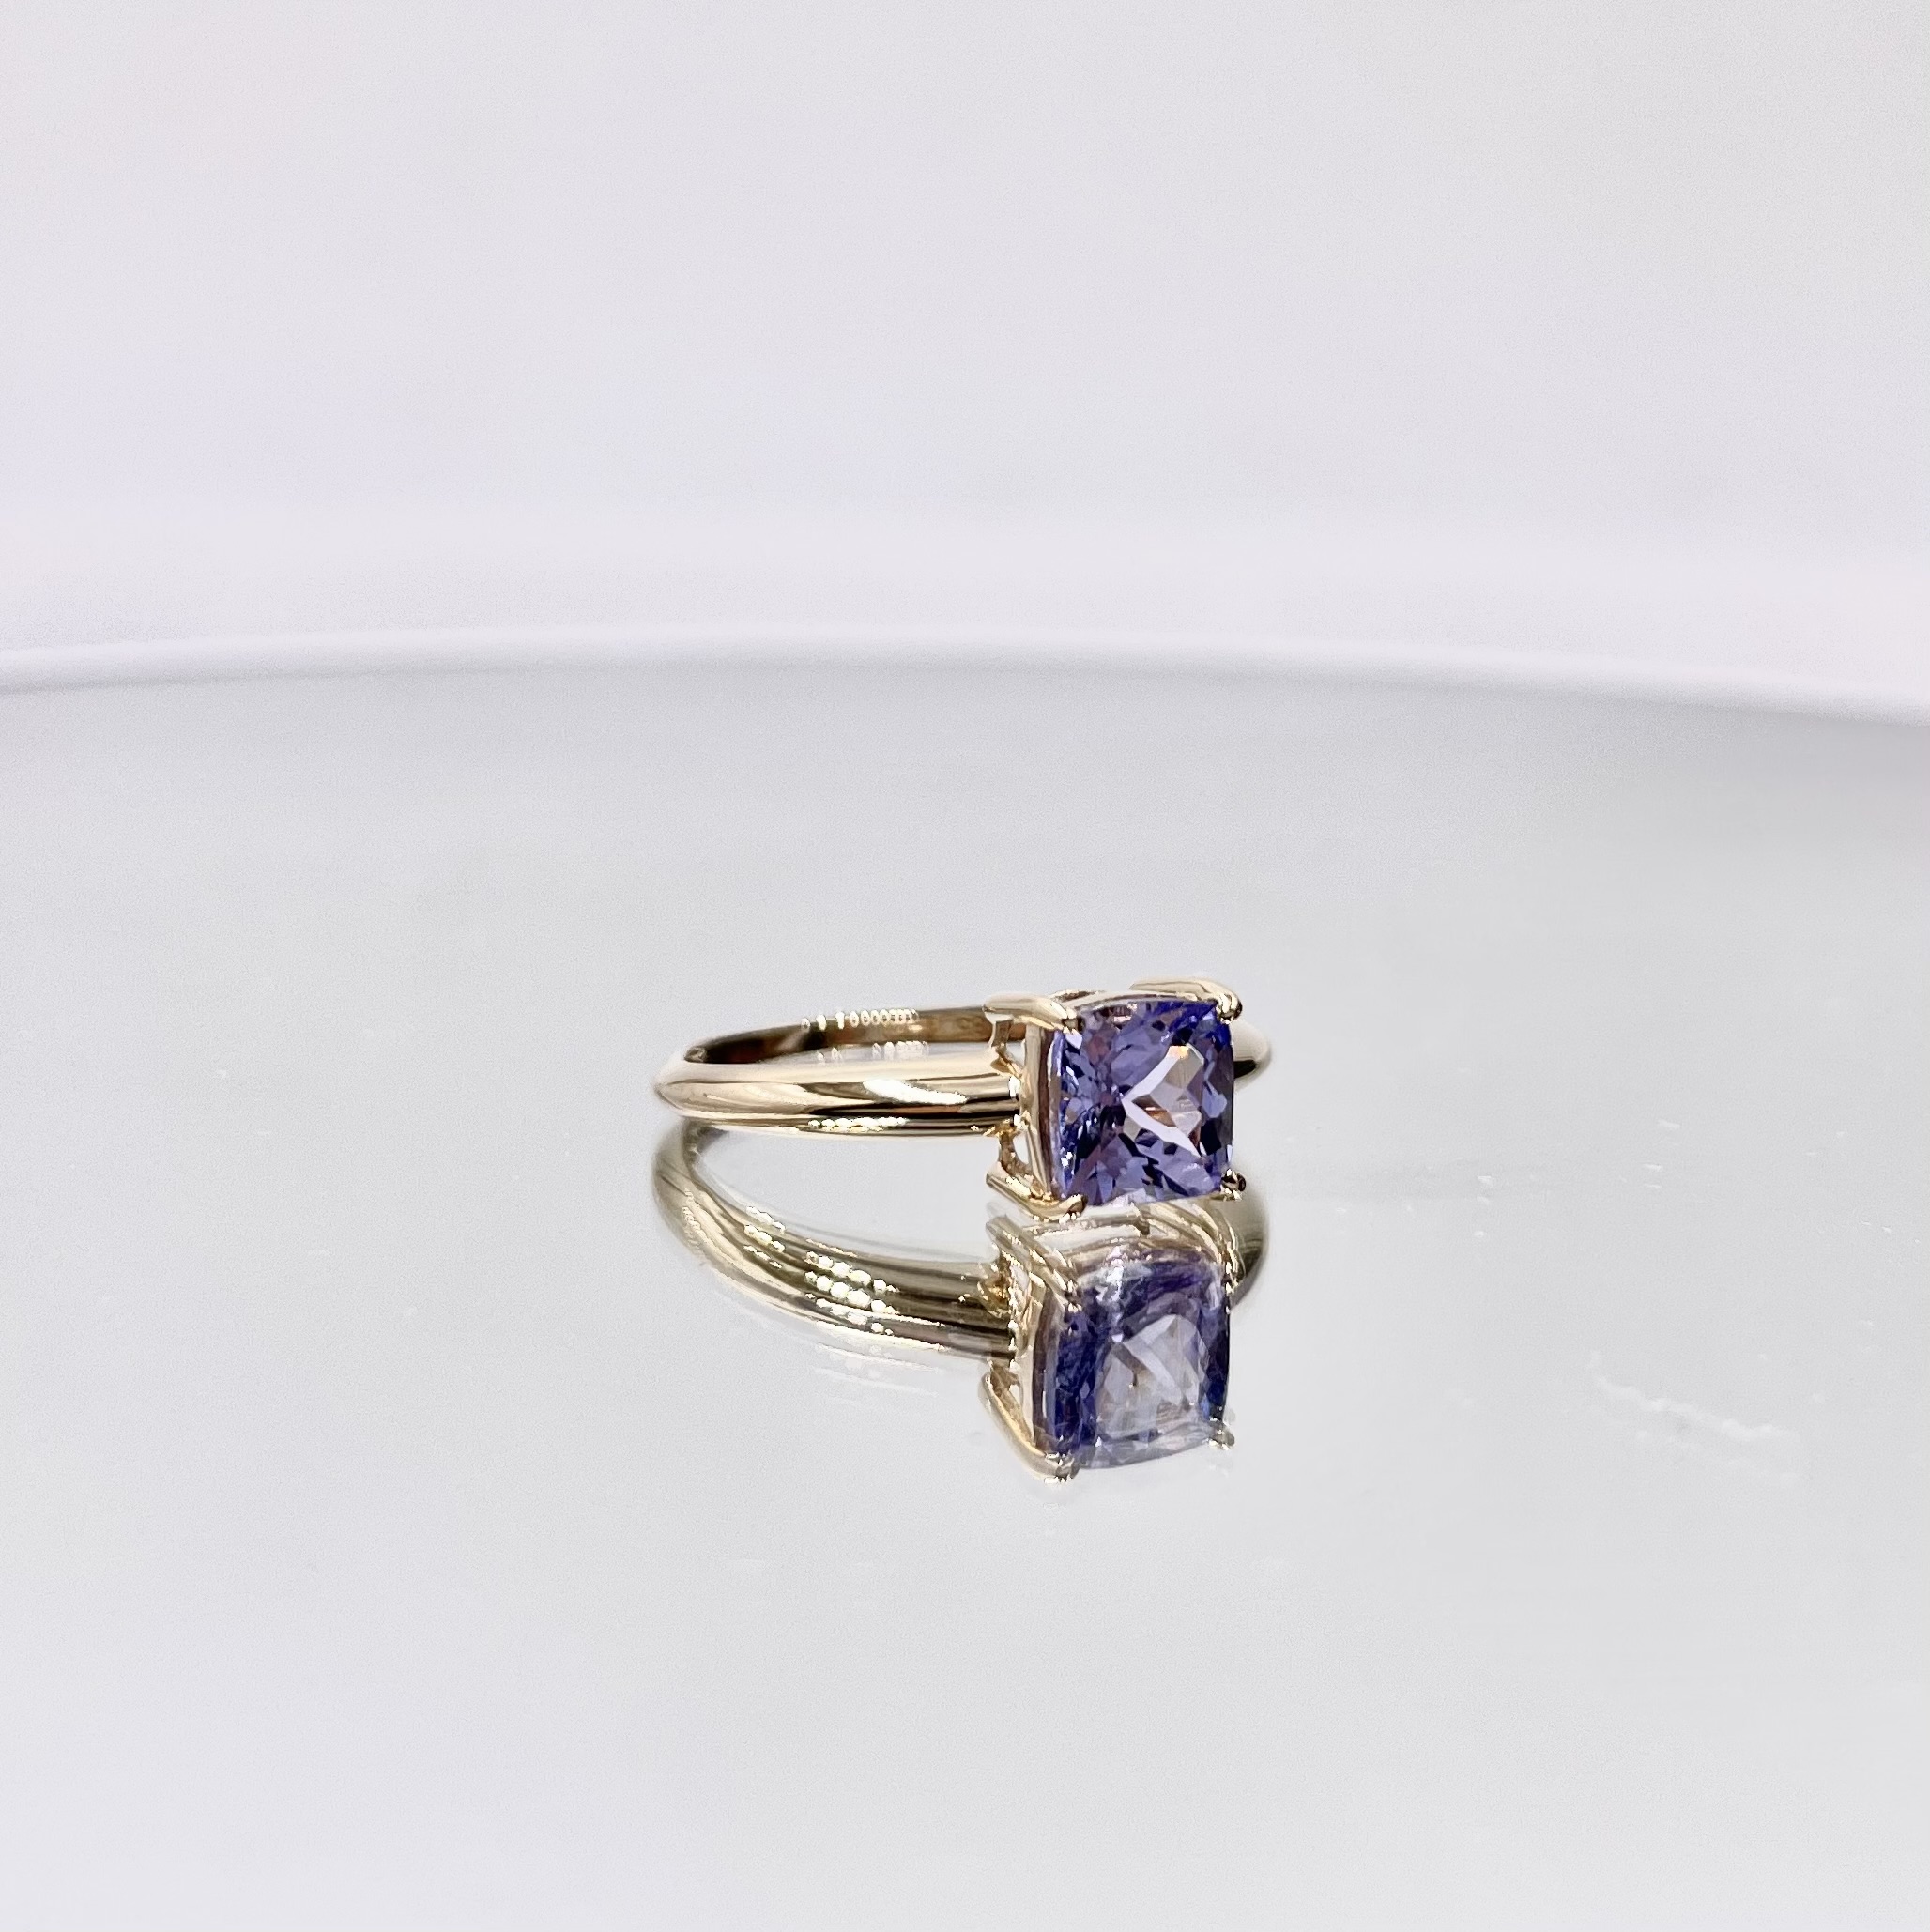 1ct Cushion Cut Tanzanite 6.0x6.0mm Yellow Gold Ring for Women Wedding Party Engagement-3